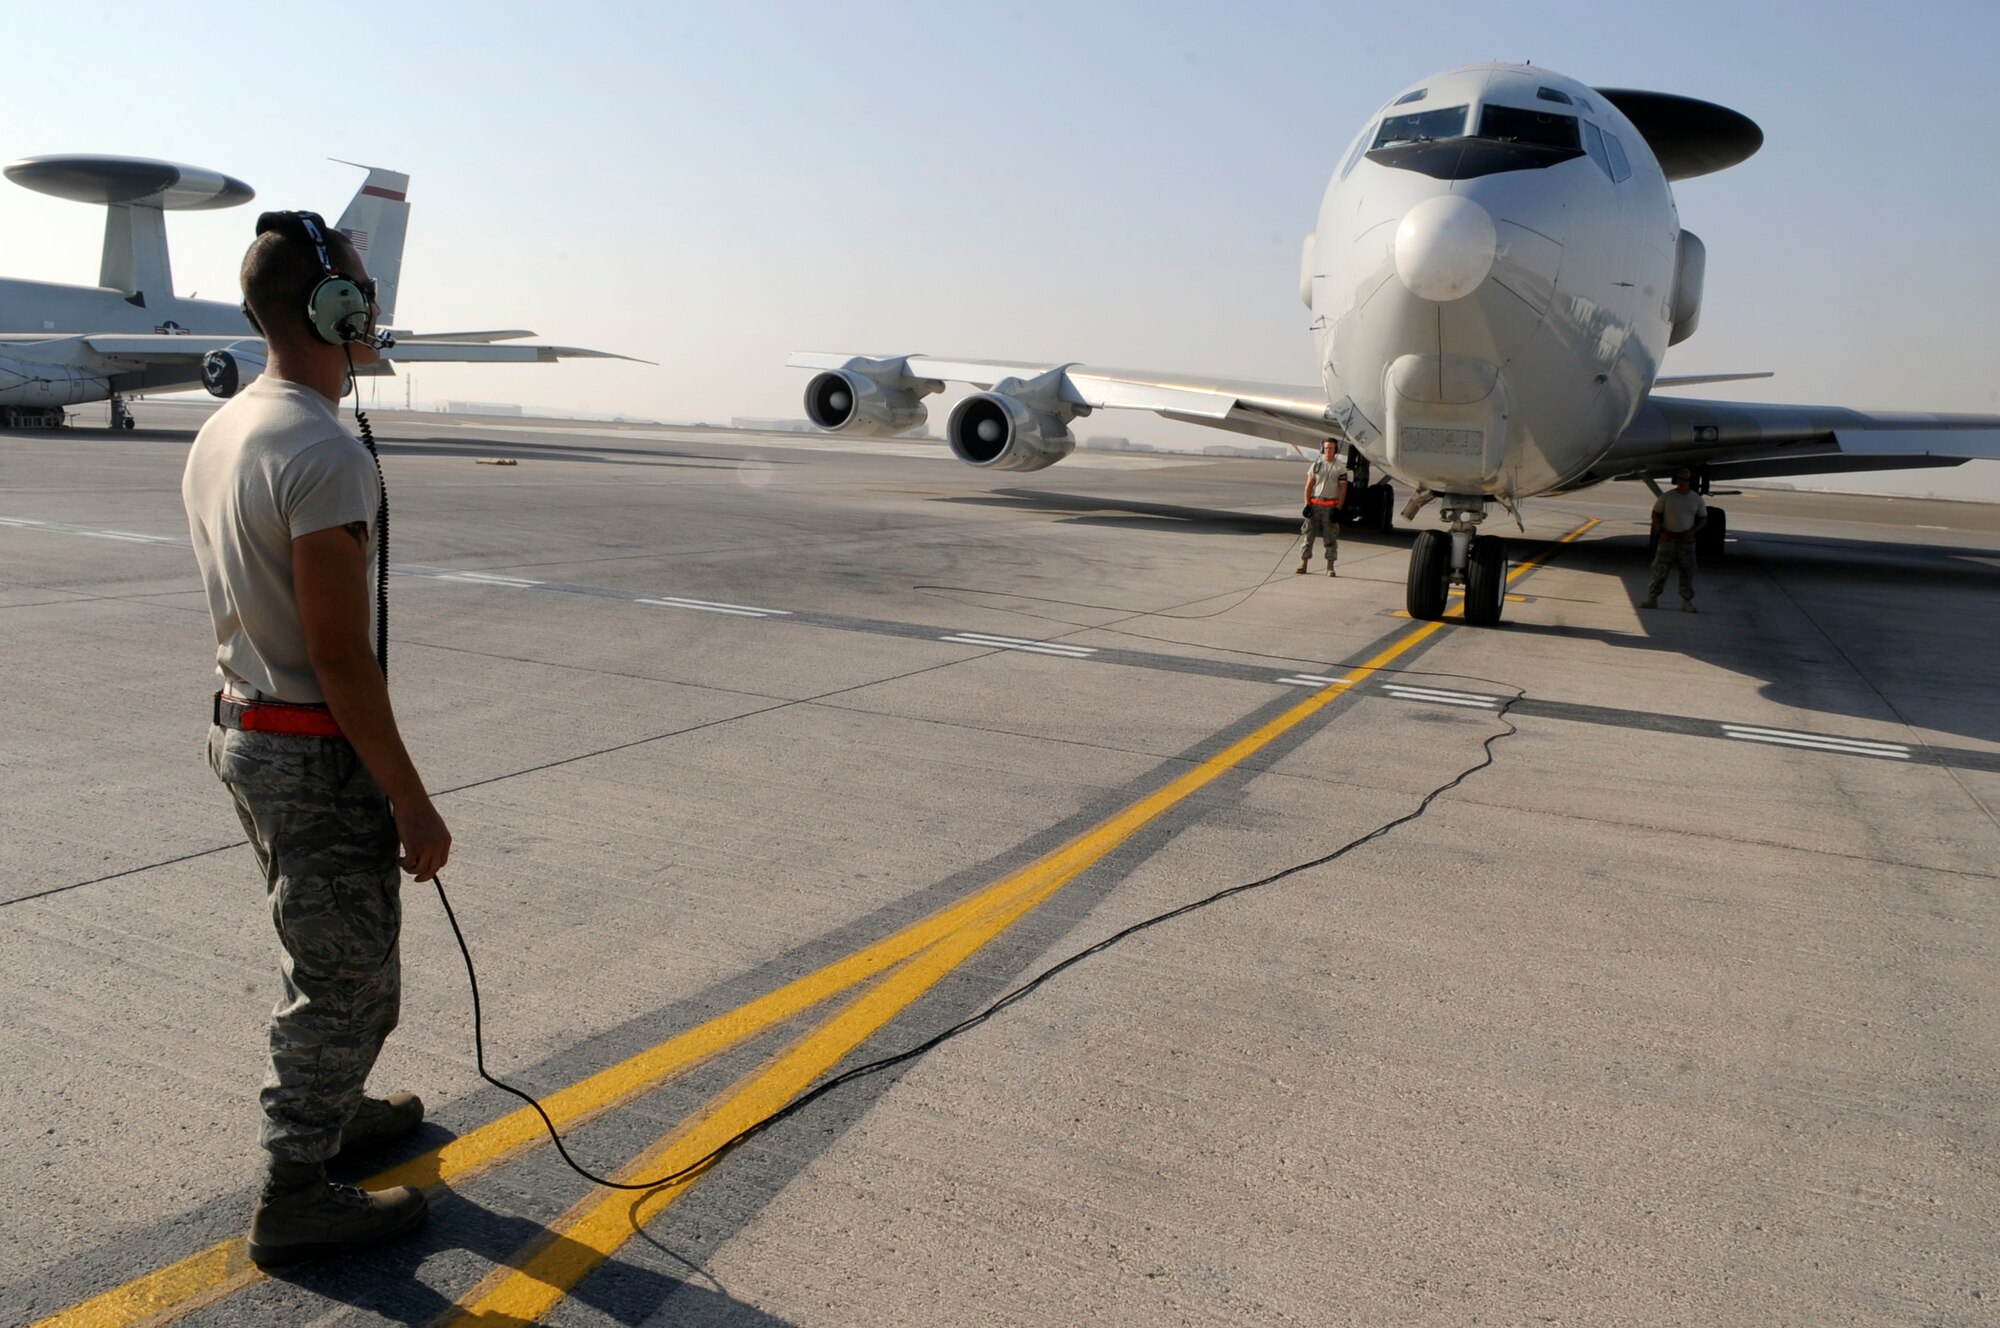 SOUTHWEST ASIA – Airman 1st Class Brandon Posey, 380th Expeditionary Aircraft Maintenance Squadron, communicates with crew members as Senior Airman Brandon Camber and Staff Sgt. Thomas Wilson, 380th EAMXS, standby to clear the chocks, before an E-3 Sentry taxis to take-off in support of Operation Enduring Freedom Nov. 16, 2009. They are deployed from Tinker Air Force Base, Okla. Airman Posey calls Destin, Fla., home. Airman Camber grew up in Georgetown, Calif., and Sergeant Wilson hails from Dallas, Texas. (U.S. Air Force photo/Senior Airman Stephen Linch)